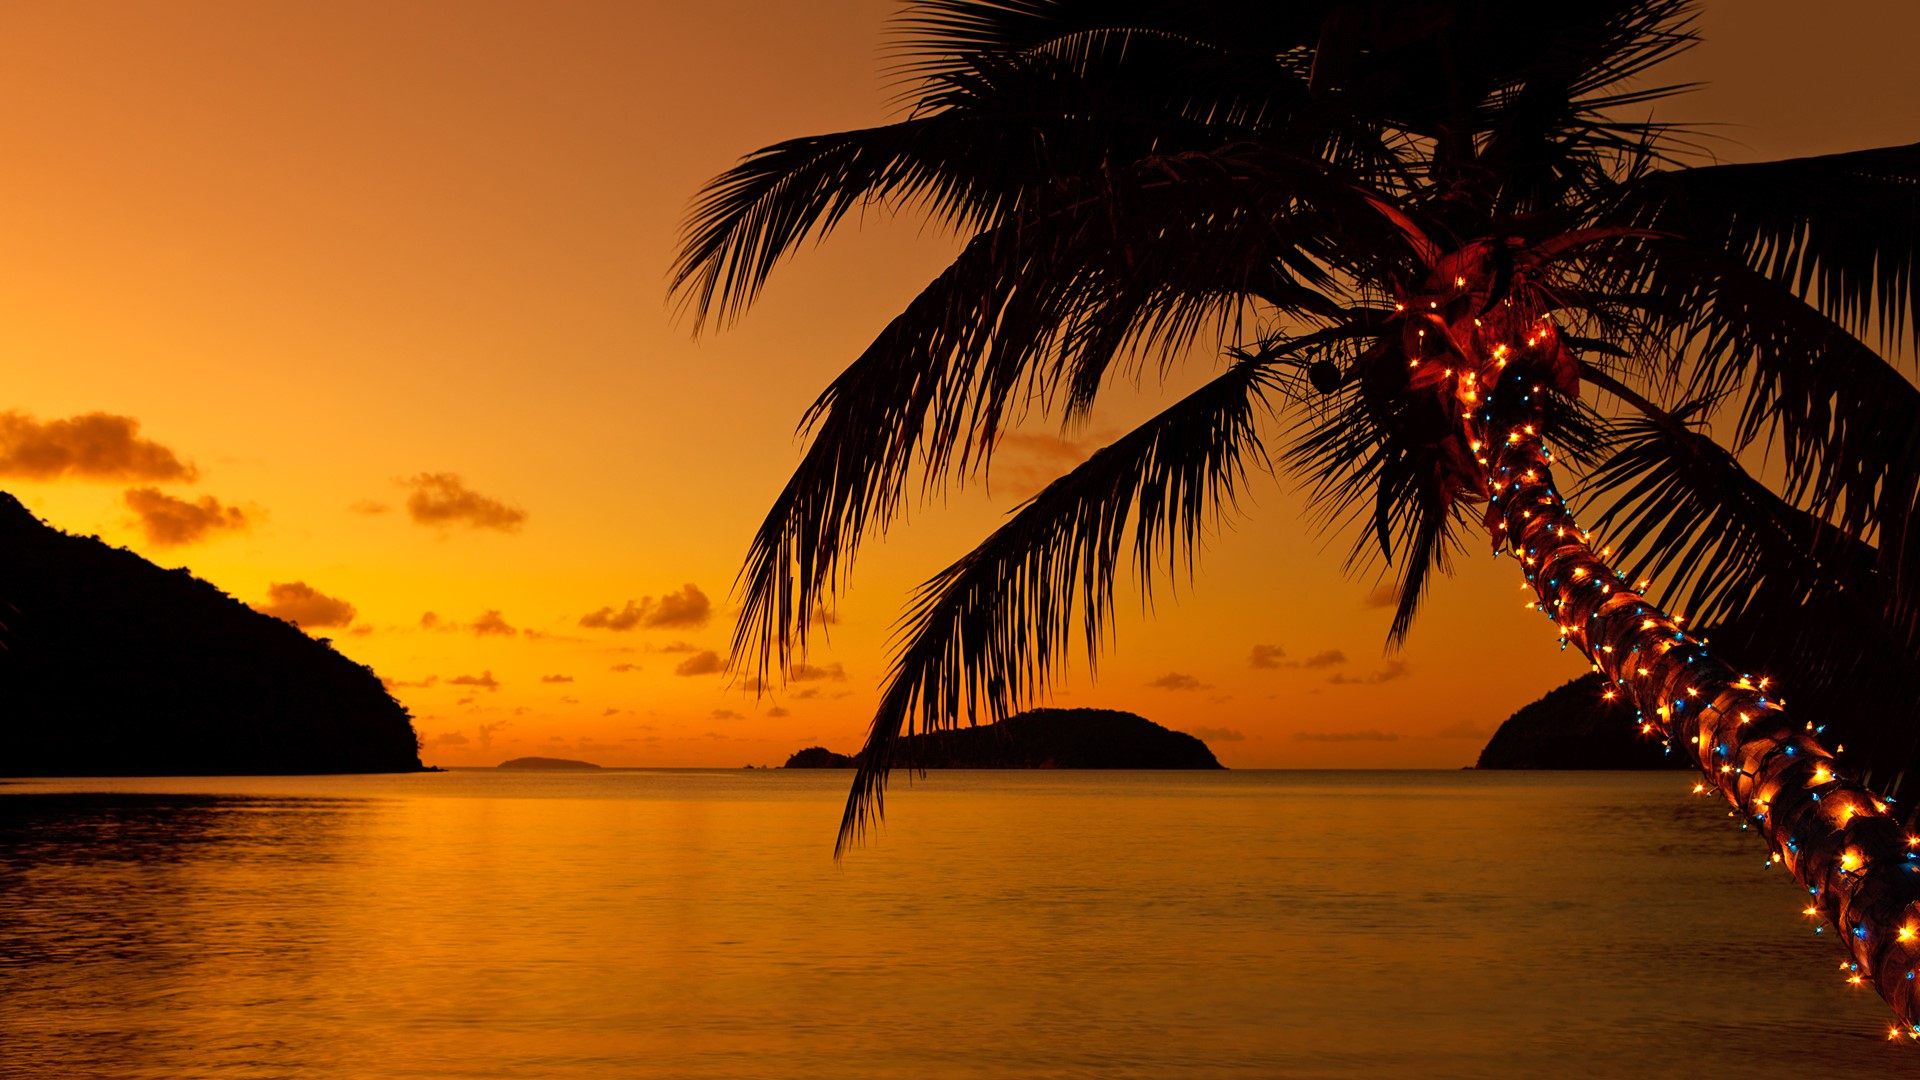 1920x1080 Christmas lights on a palm tree at the Caribbean beach at sunset | Windows 10 Spotlight Images